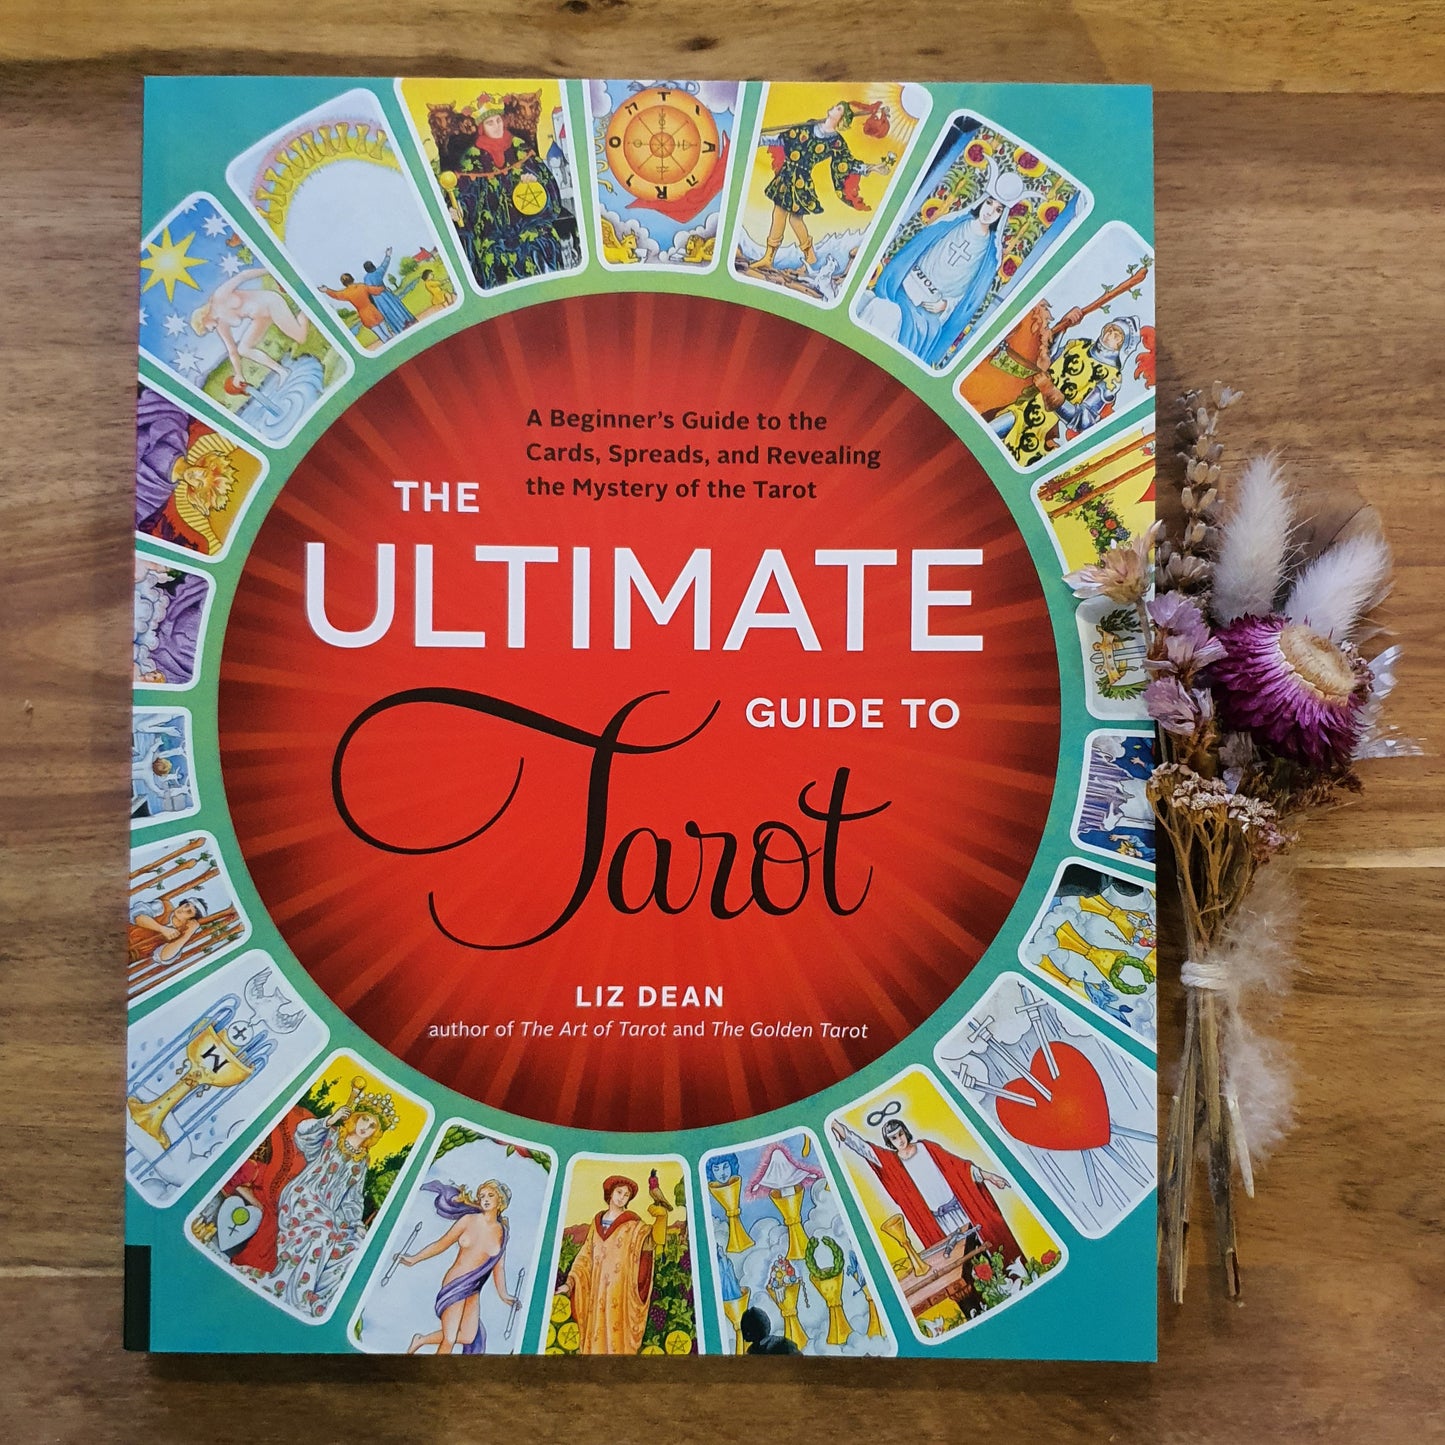 The Ultimate Guide to Tarot: A Beginner's Guide To The Cards